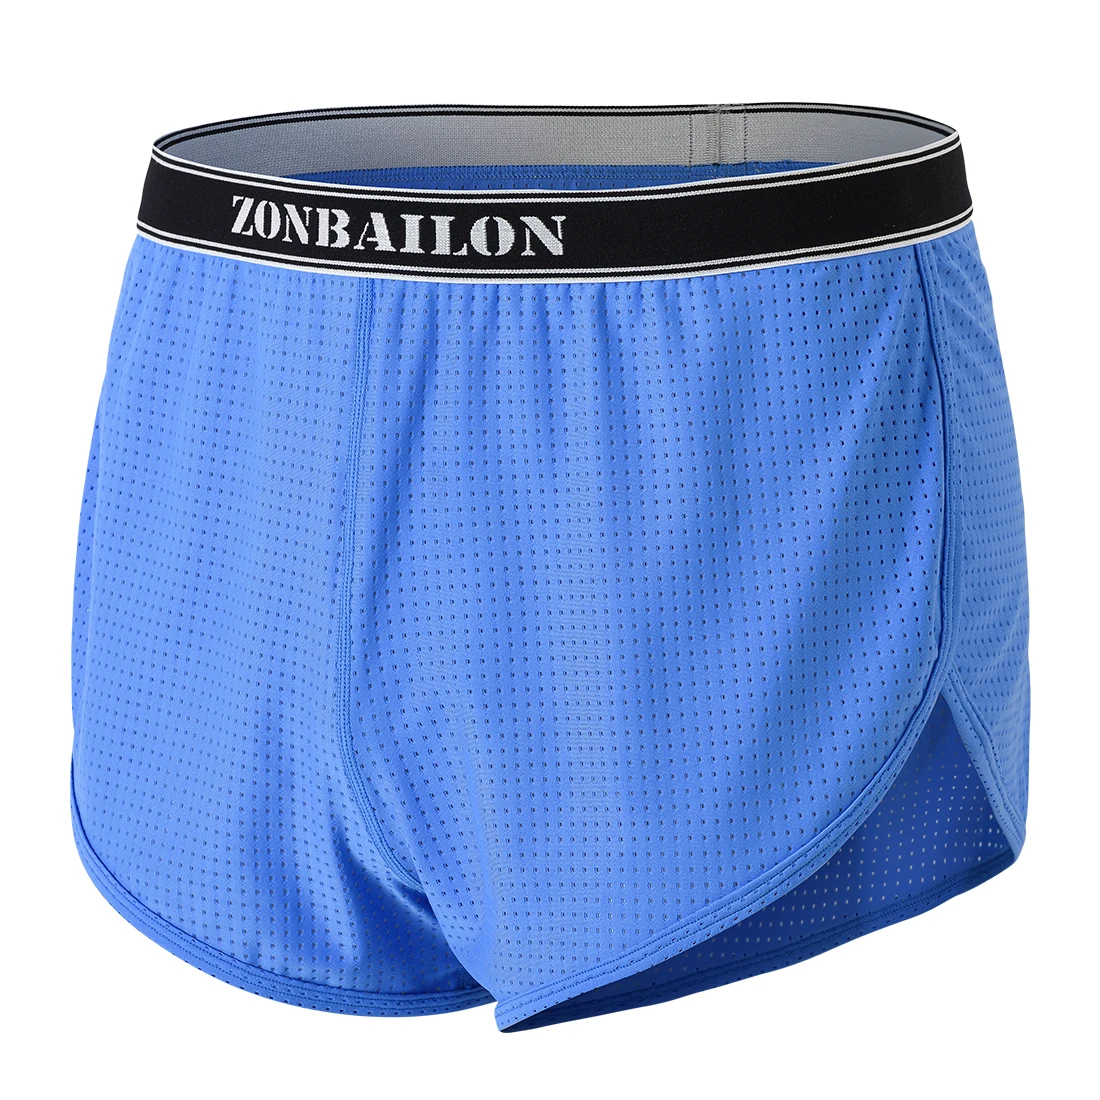 Zonbailon New Men's Boxer Underwear SexyFull Coverage Hip with Low Rise Short Briefs Trunks Style Side Split Boxer Underwear for samsung galaxy z flip5 embroidery style full coverage phone case grey